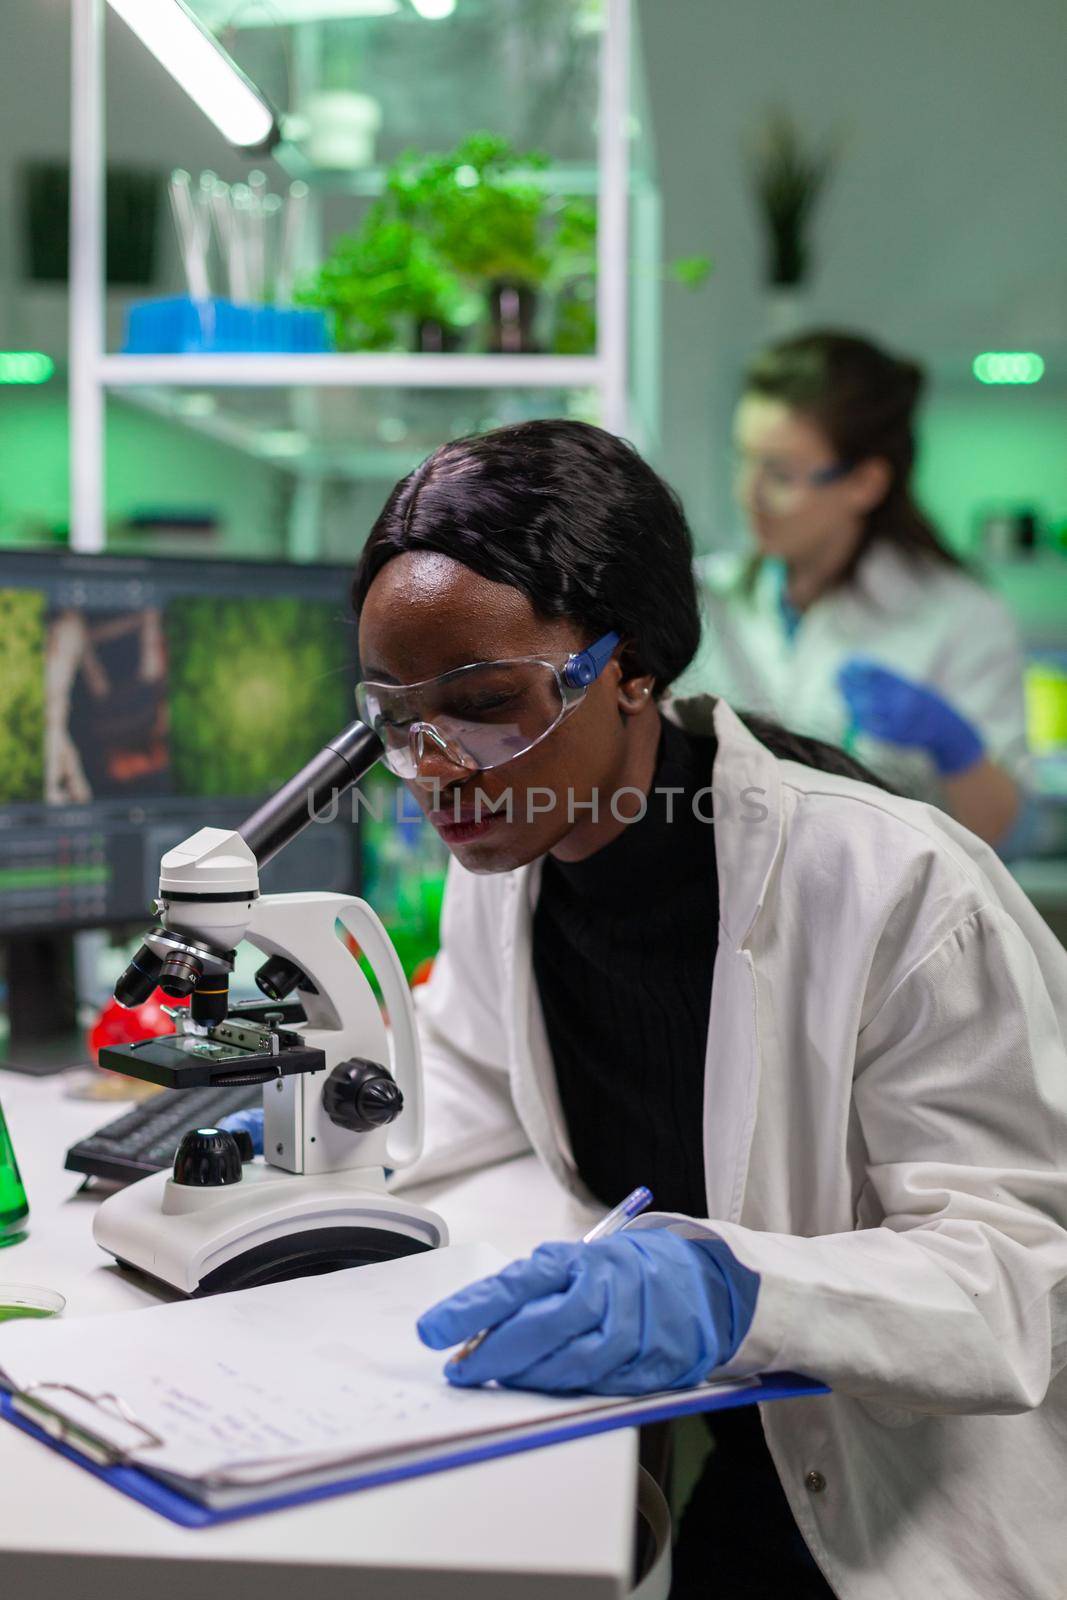 Biochemistry doctor examining chemical test using microscope for genetic researcher. Biologist specialist discovery organic gmo plants while working in microbiology food laboratory.